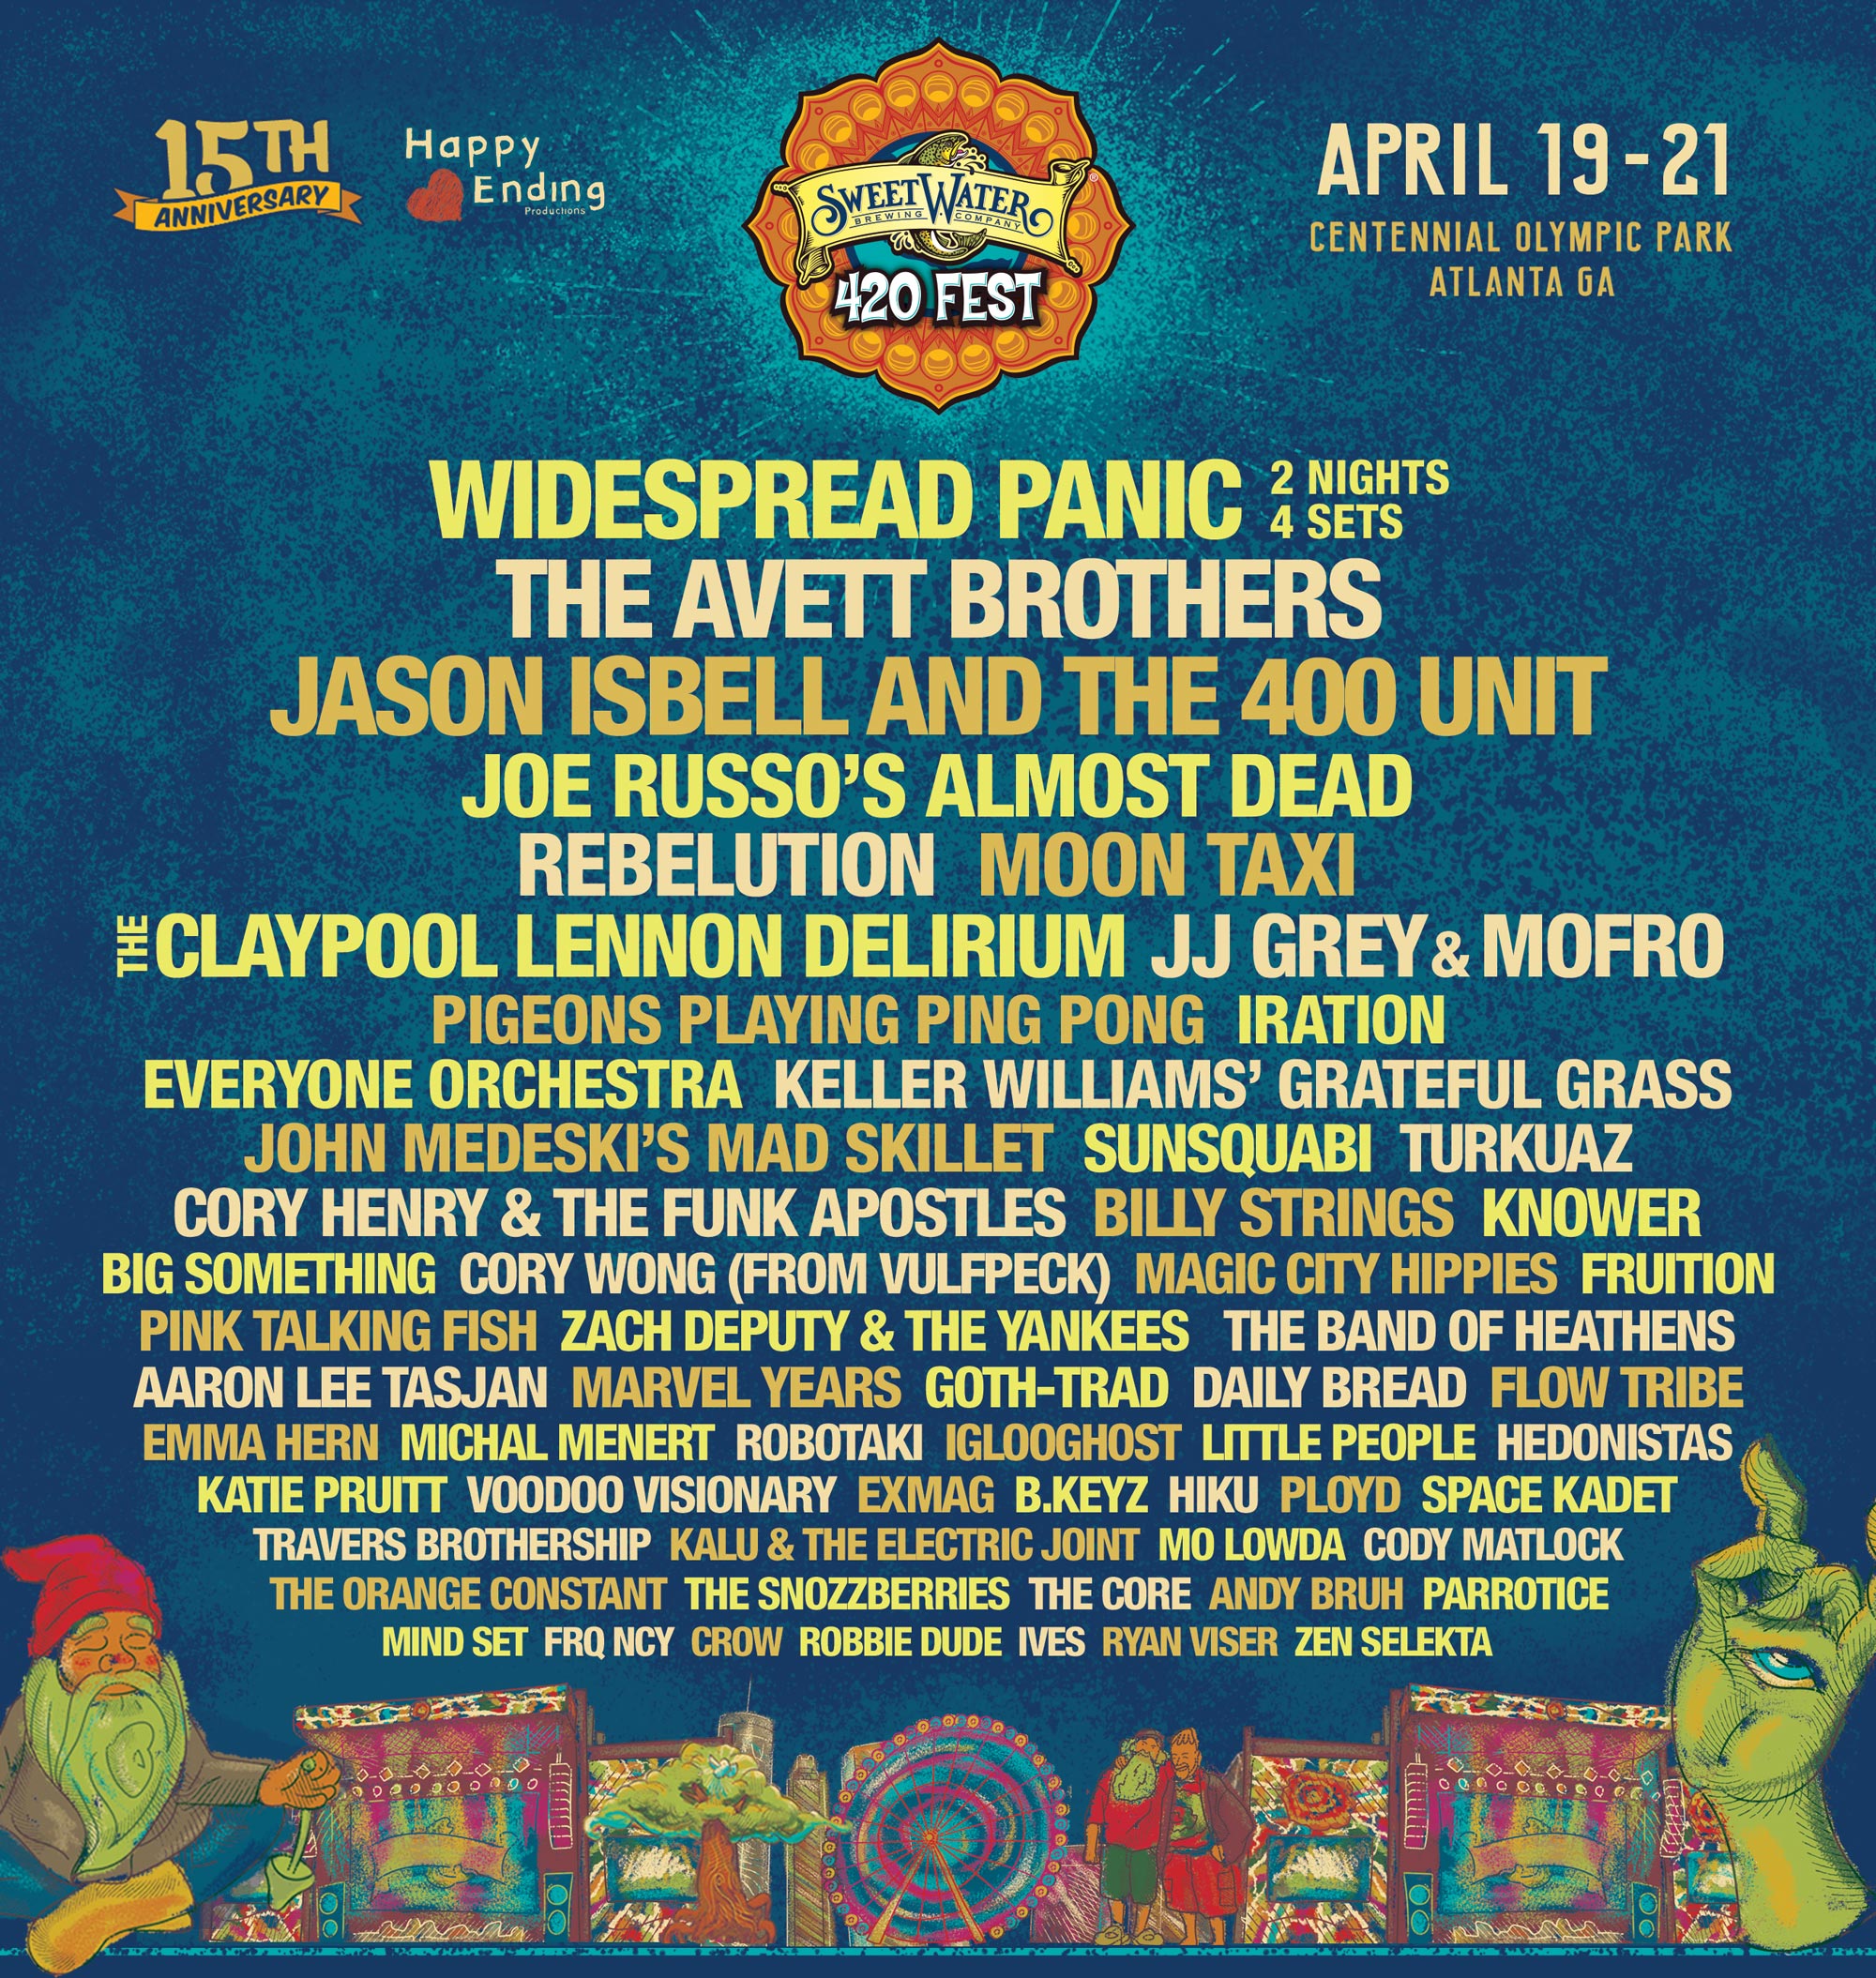 SweetWater 420 Fest 2019 Saturday April 20th Creative Loafing